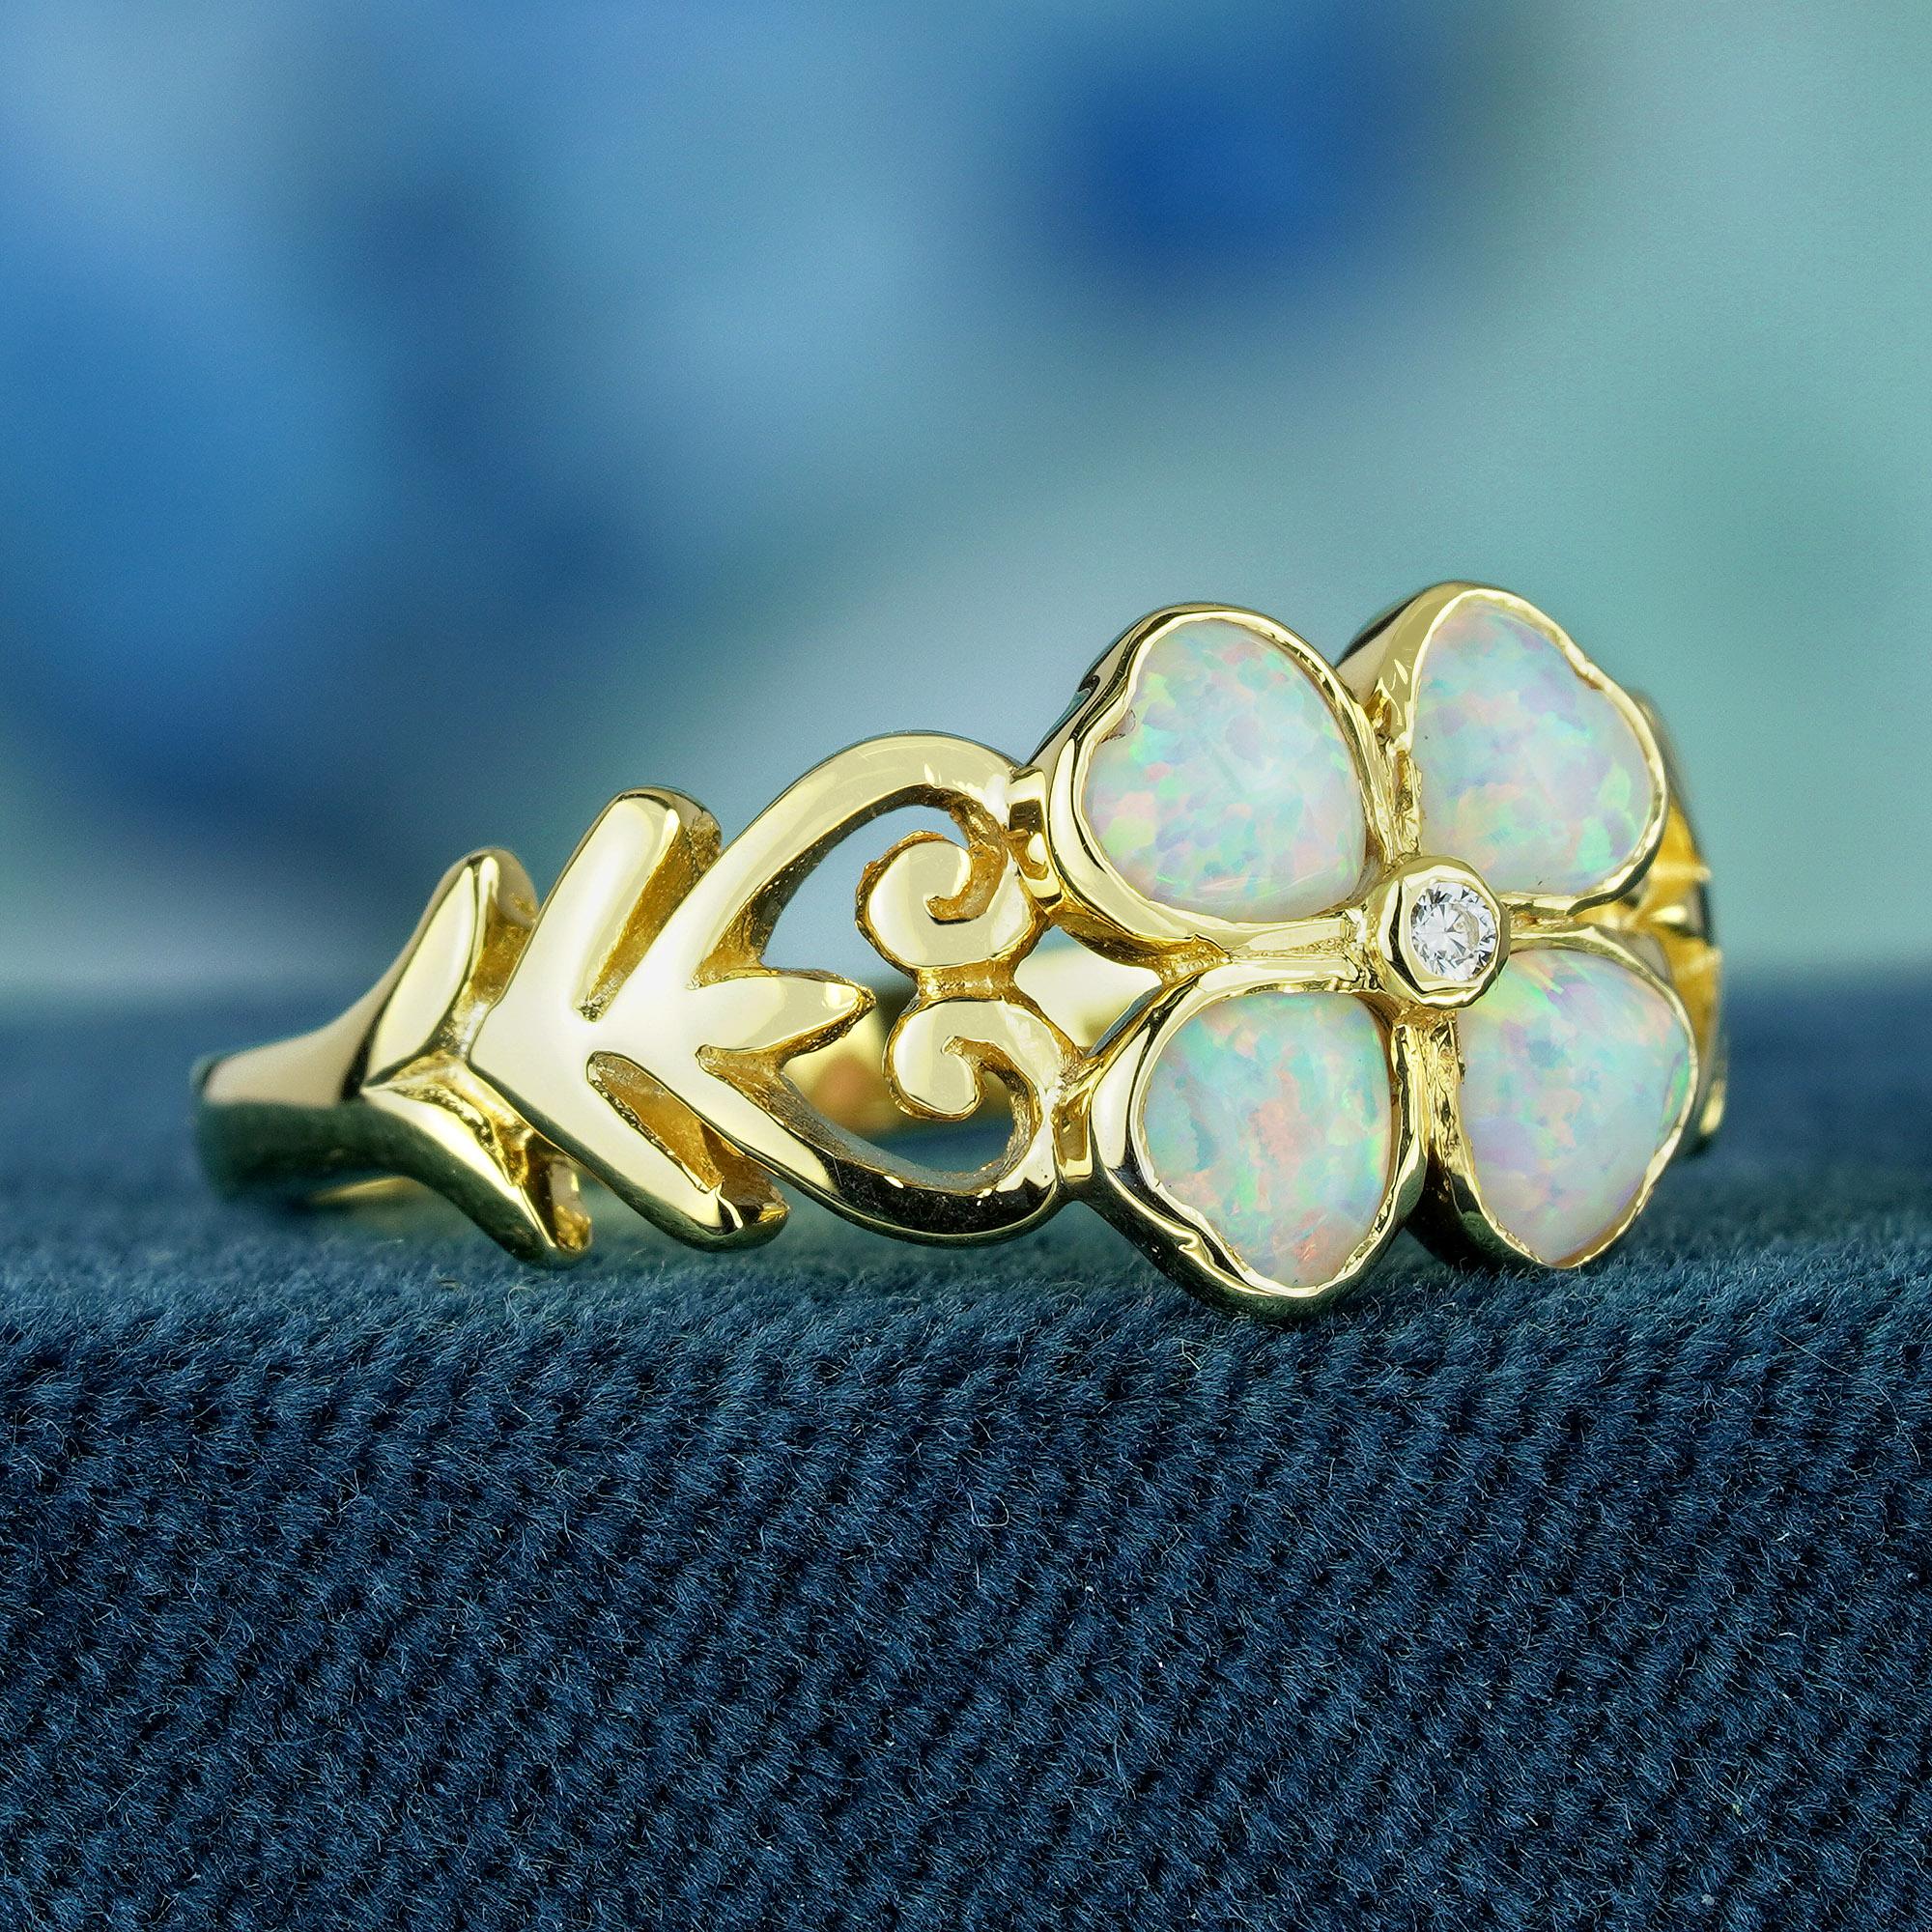 Step into a world of vintage romance and timeless elegance with our Opal and Diamond Vintage Style Floral Clover Ring. Meticulously crafted in radiant yellow gold, this captivating piece features opals delicately set in four heart-shaped frames,